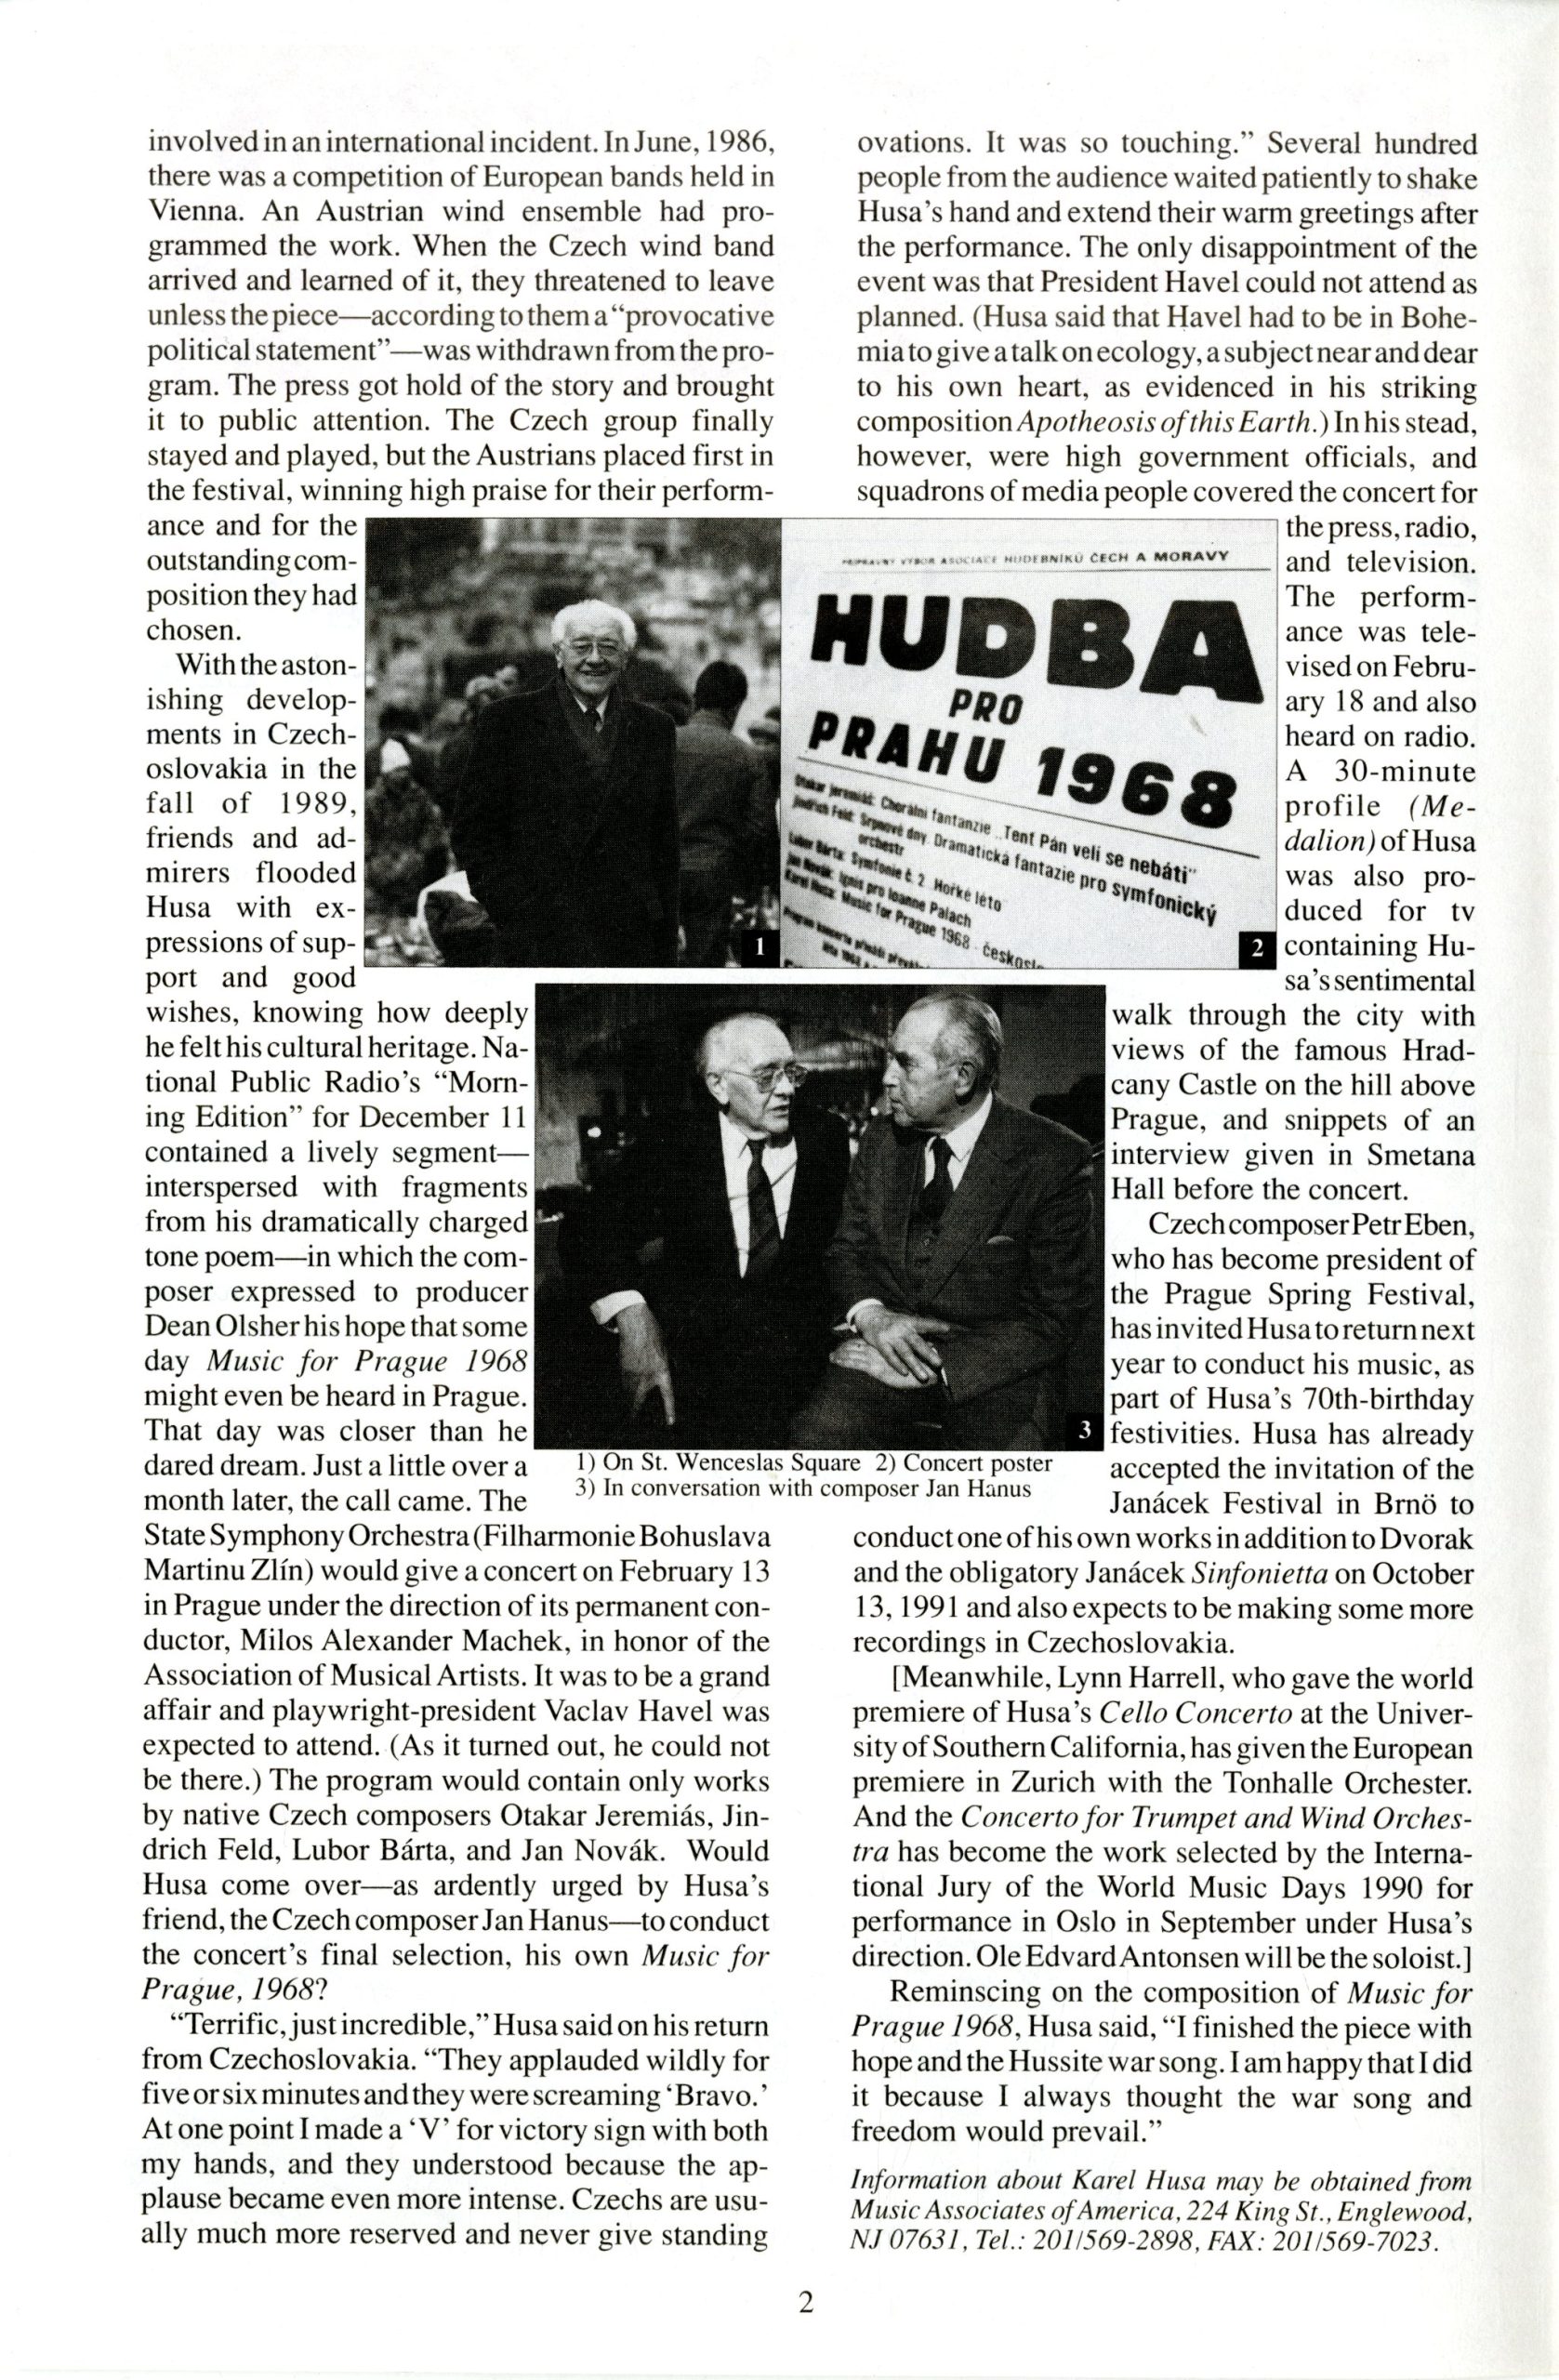 MAA article on Prague premiere (page 2).